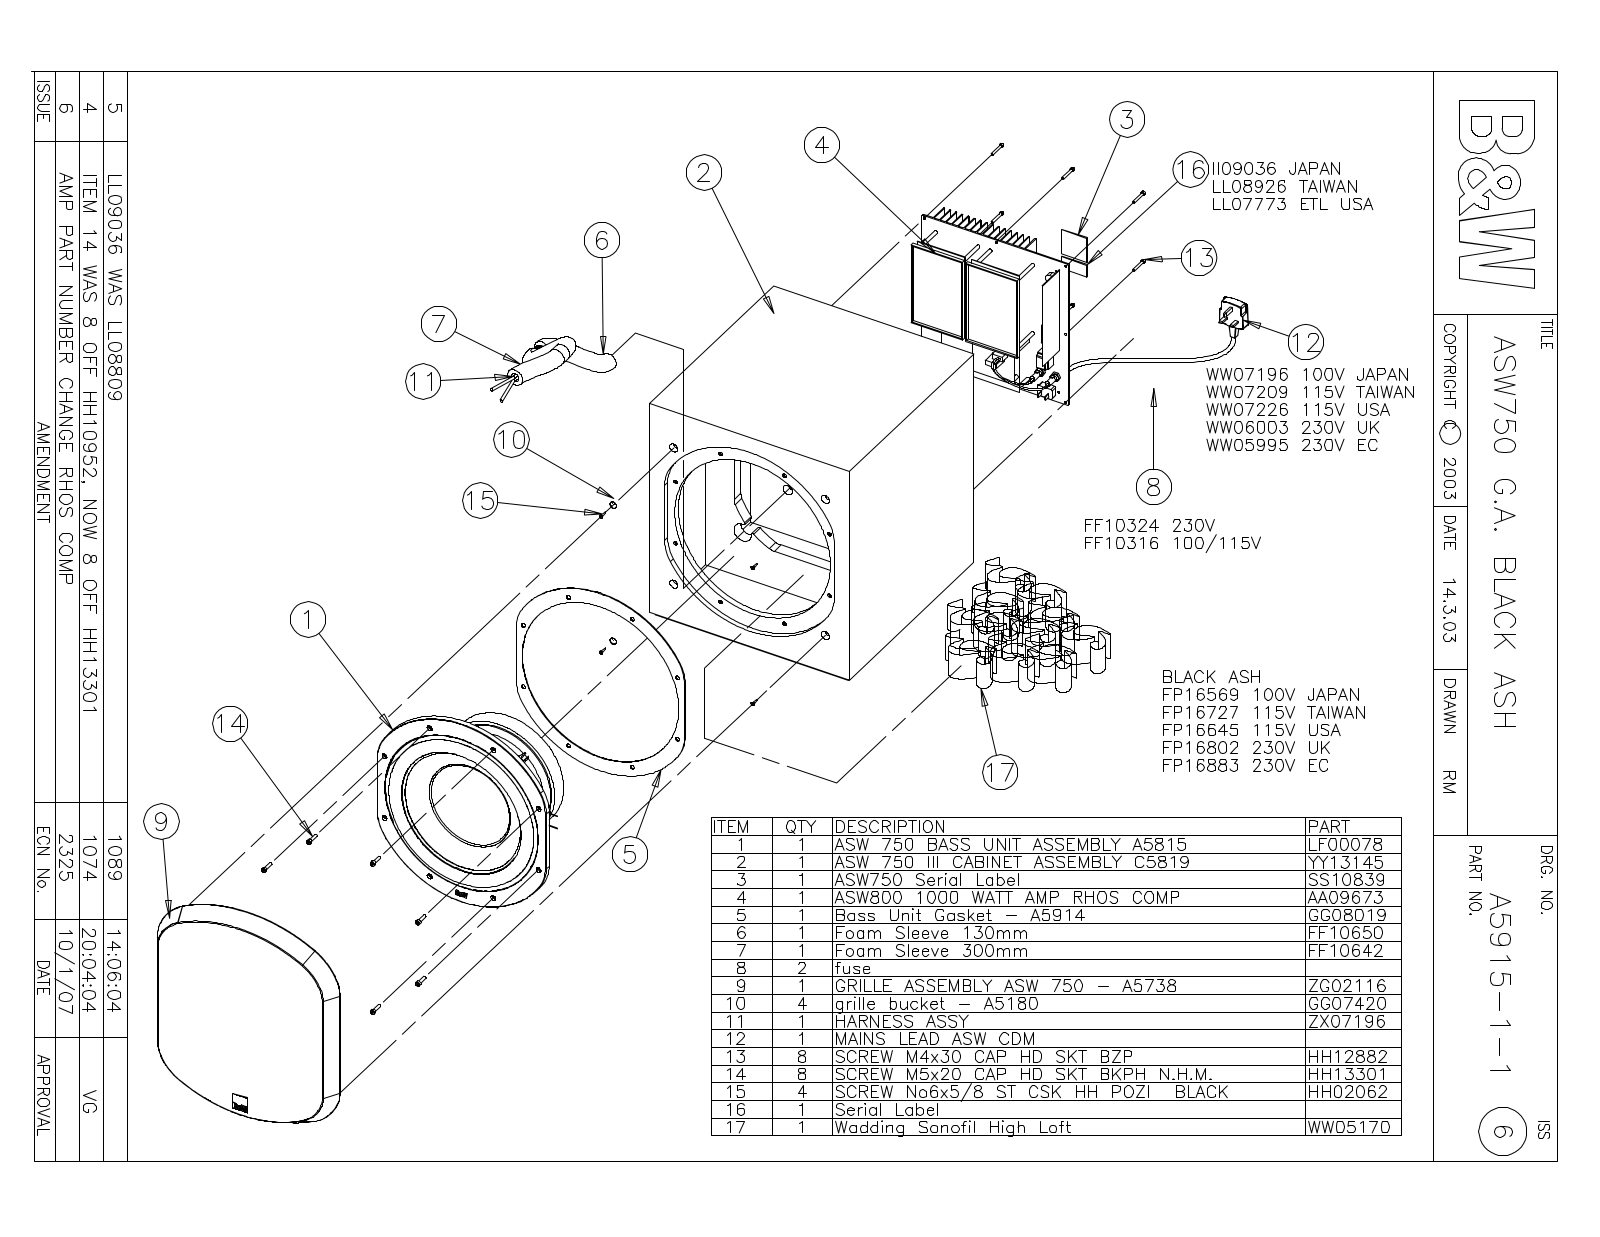 Bowers and Wilkins ASW-750 Service manual